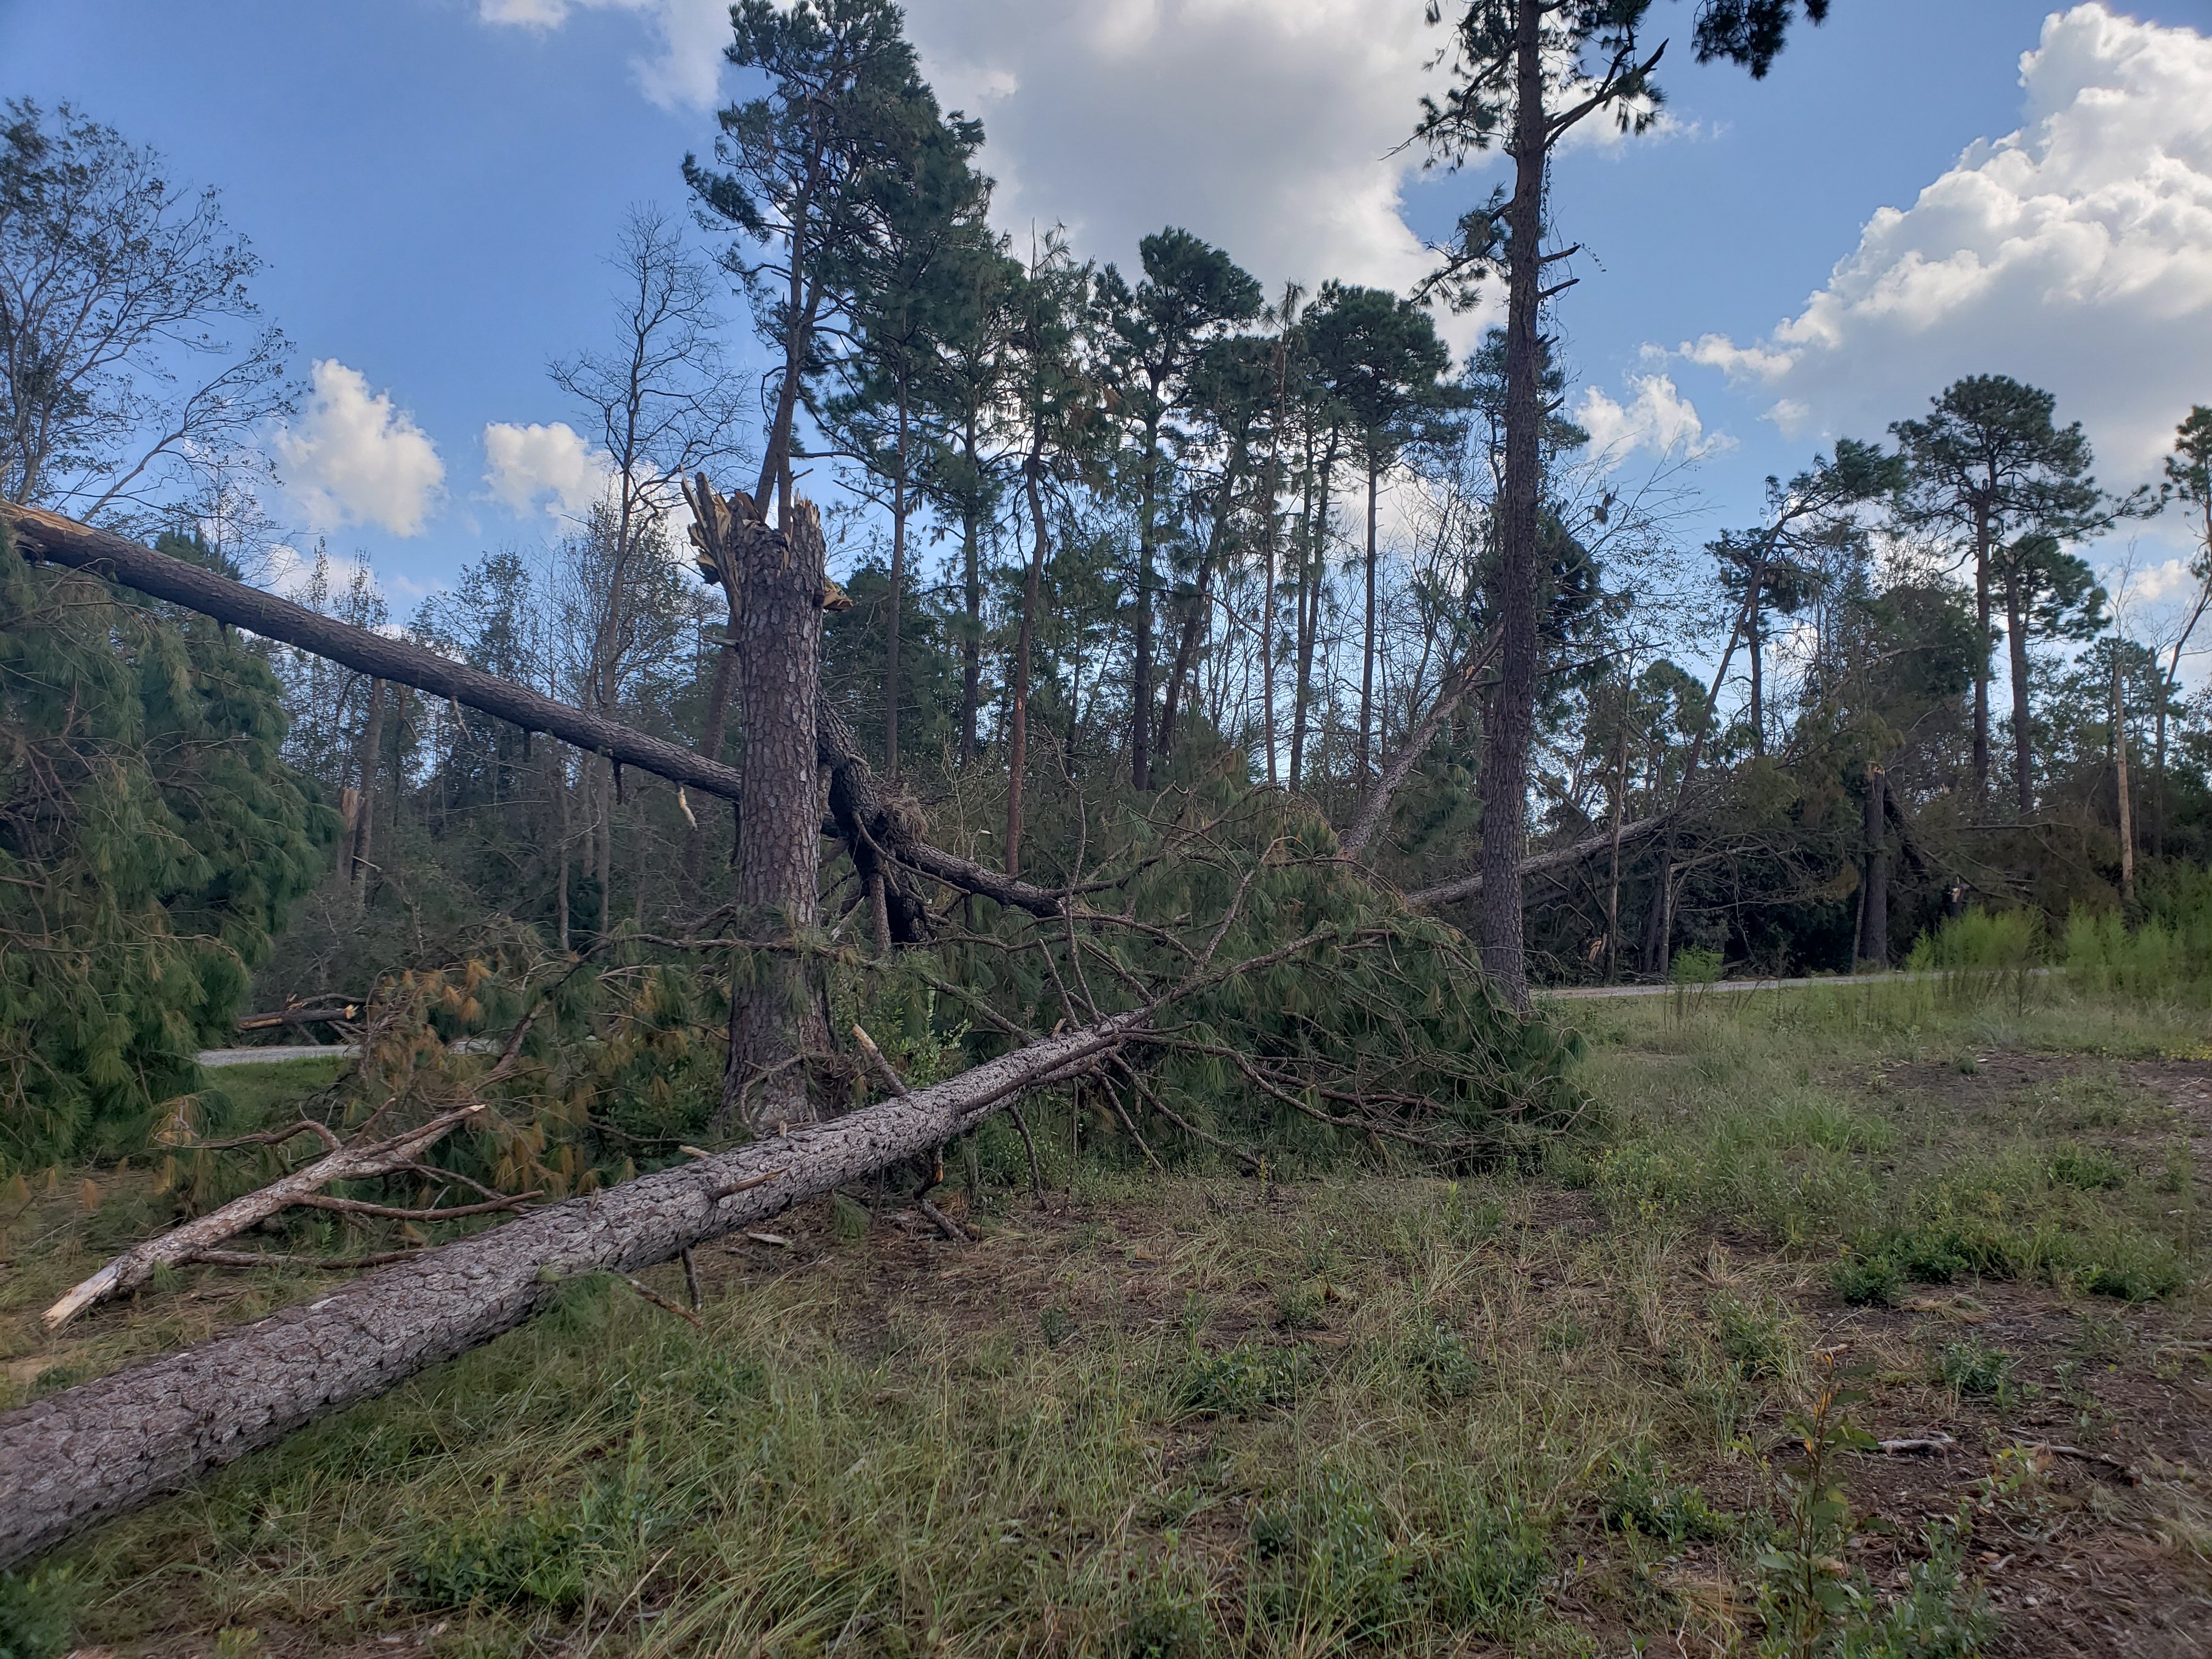 A pair of tornadoes touched down in the Bayshore community in northeastern New Hanover County during the evening hours of September 15th, producing this damage to trees.  Winds were estimated to have reached 85 mph. (Photo credit: NWS)